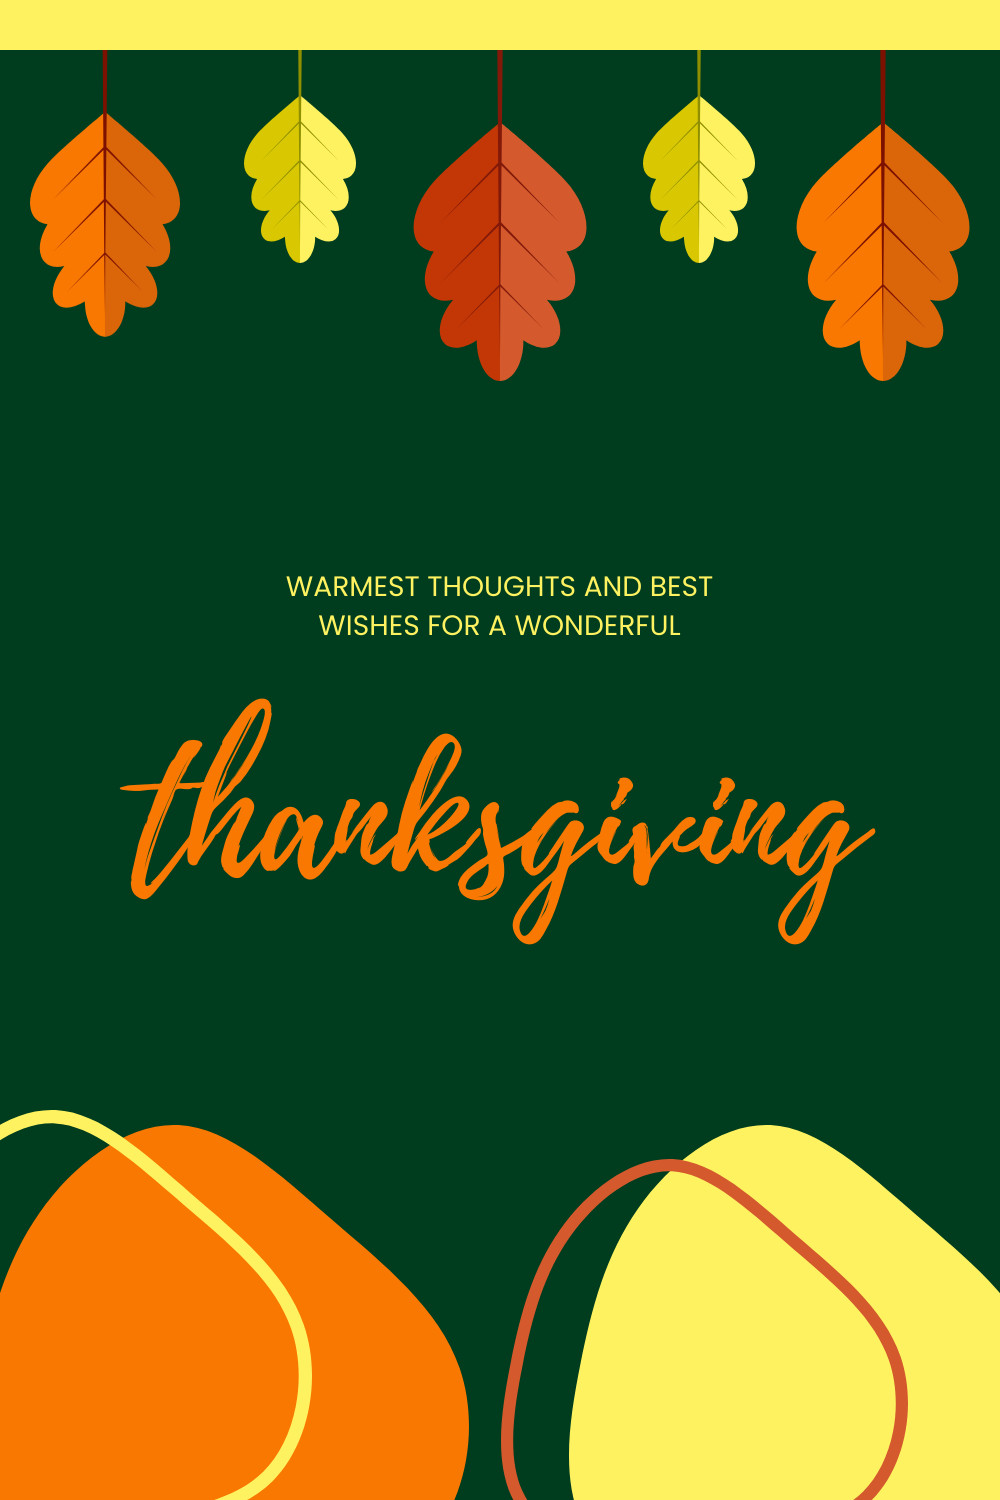 Thanksgiving Warmest Thoughts  Facebook Cover 820x360